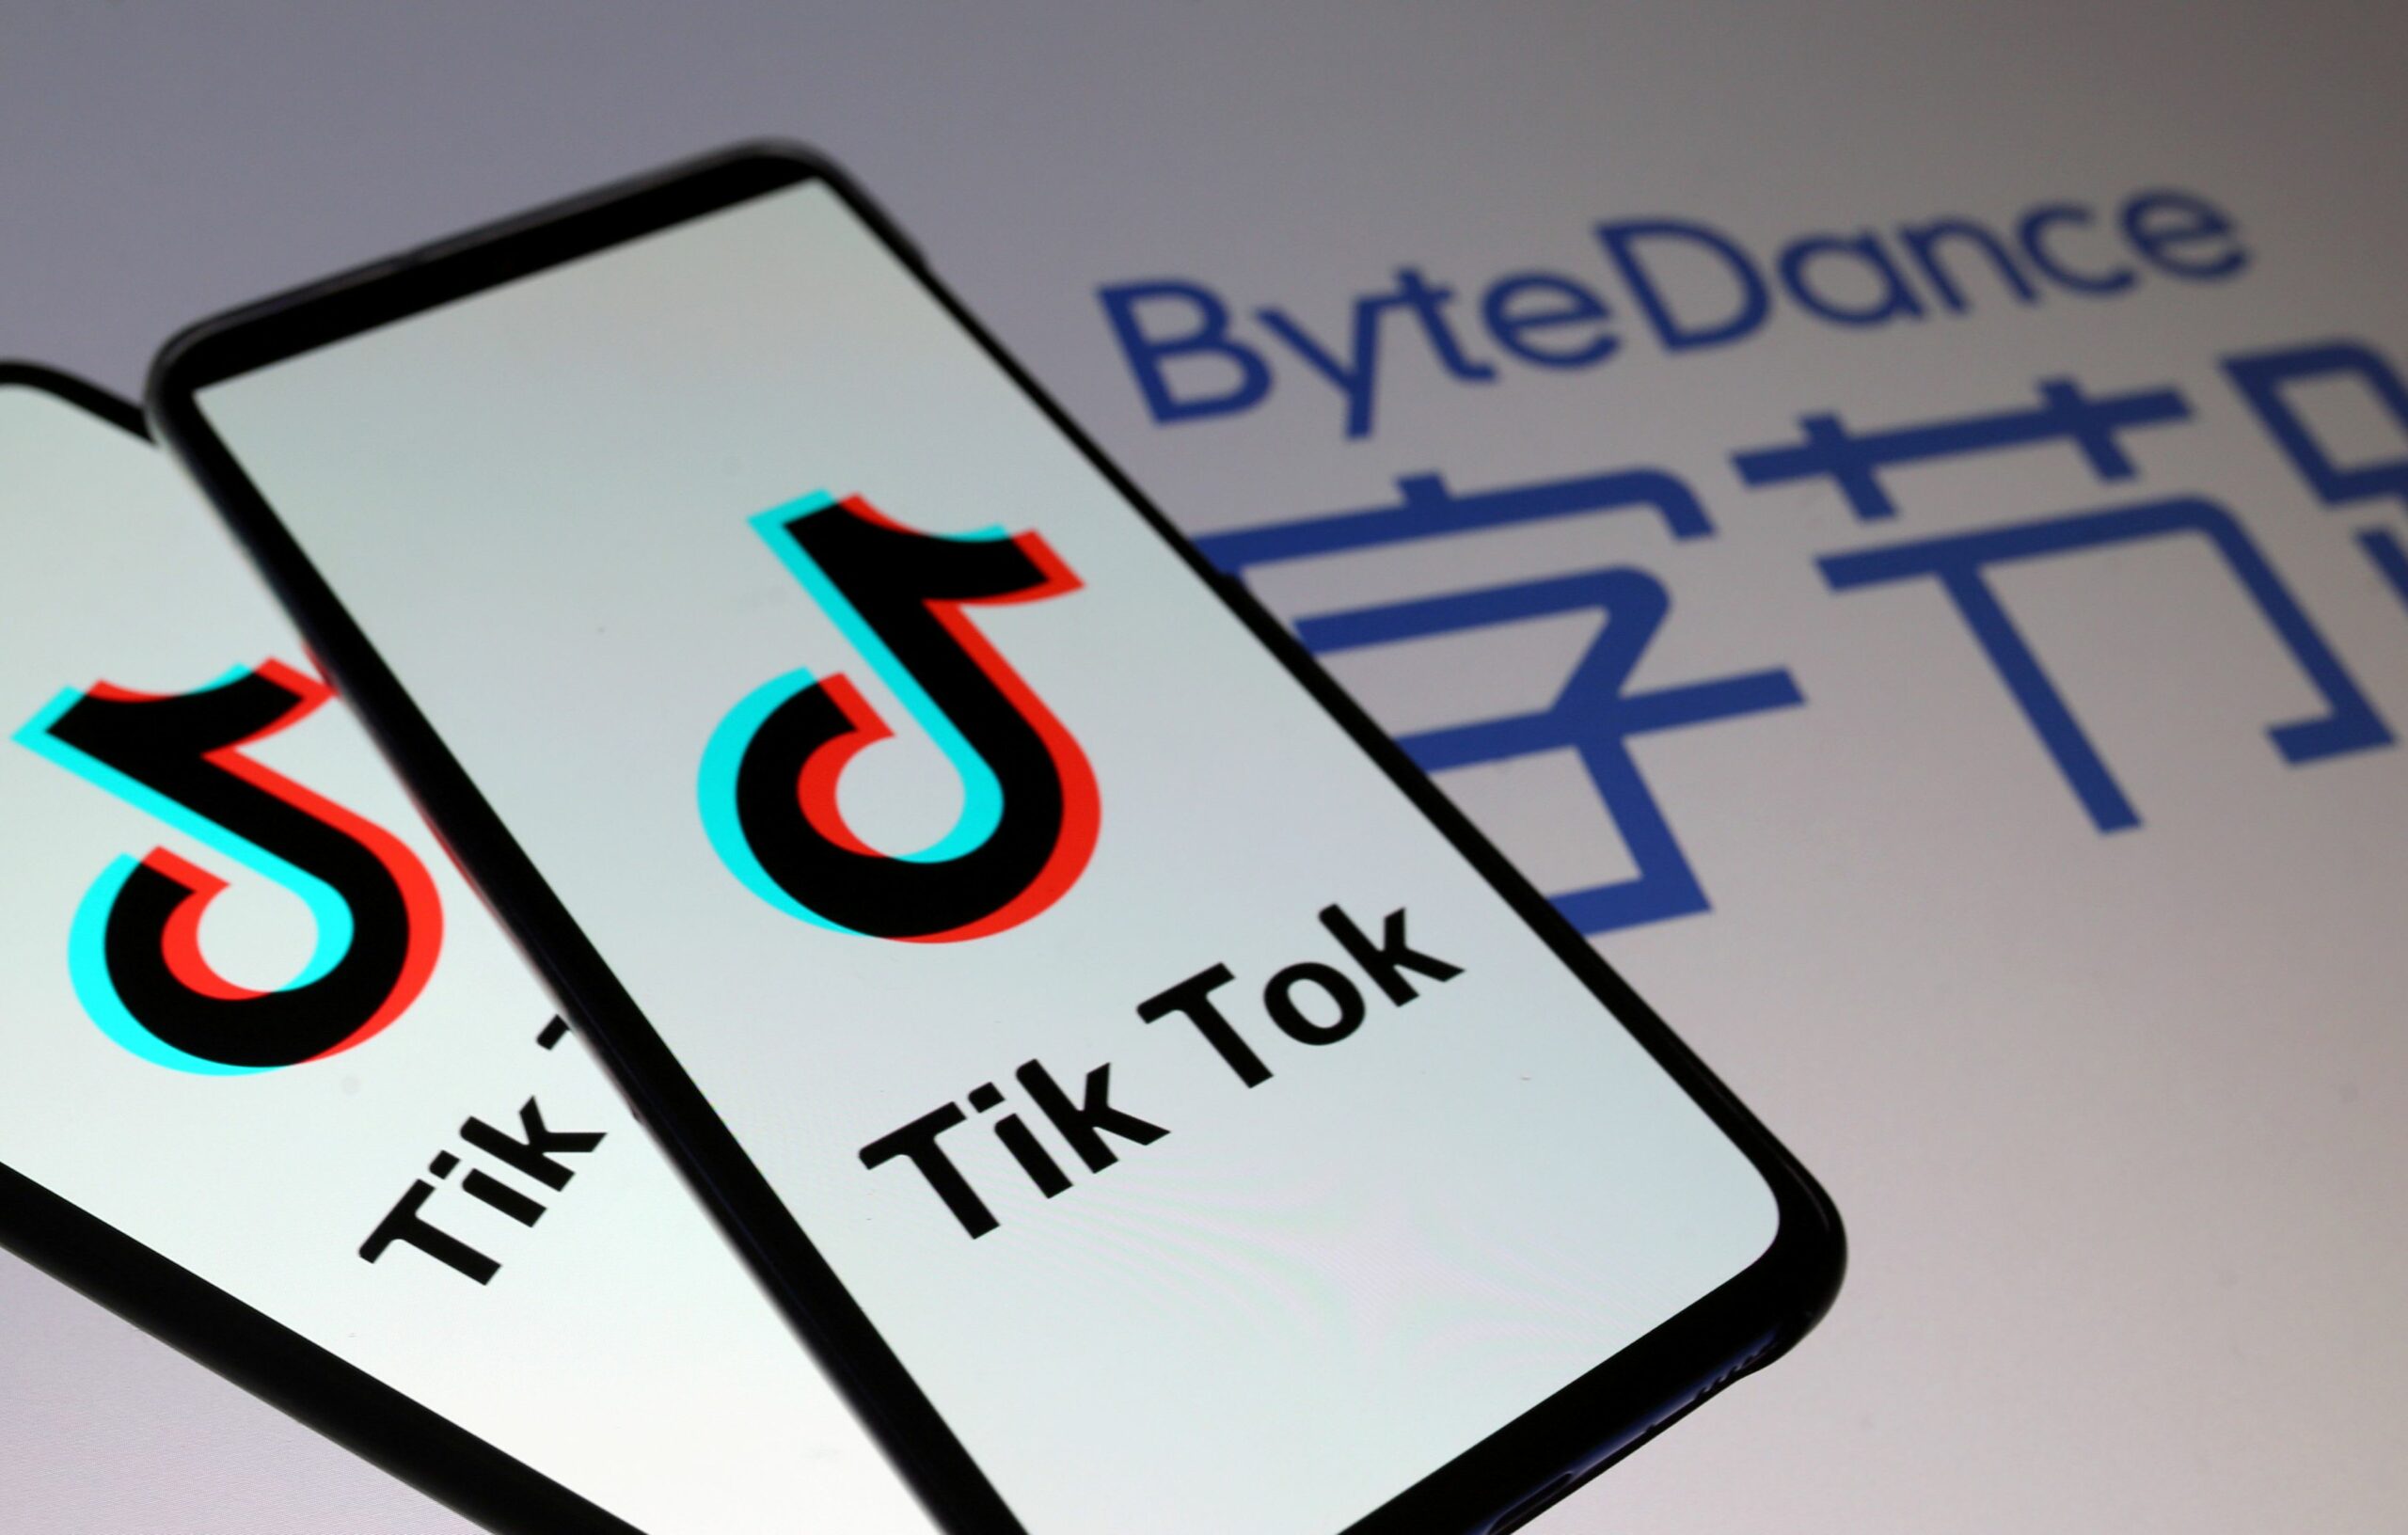 President Trump orders ByteDance to divest from its U.S. TikTok business within 90 days